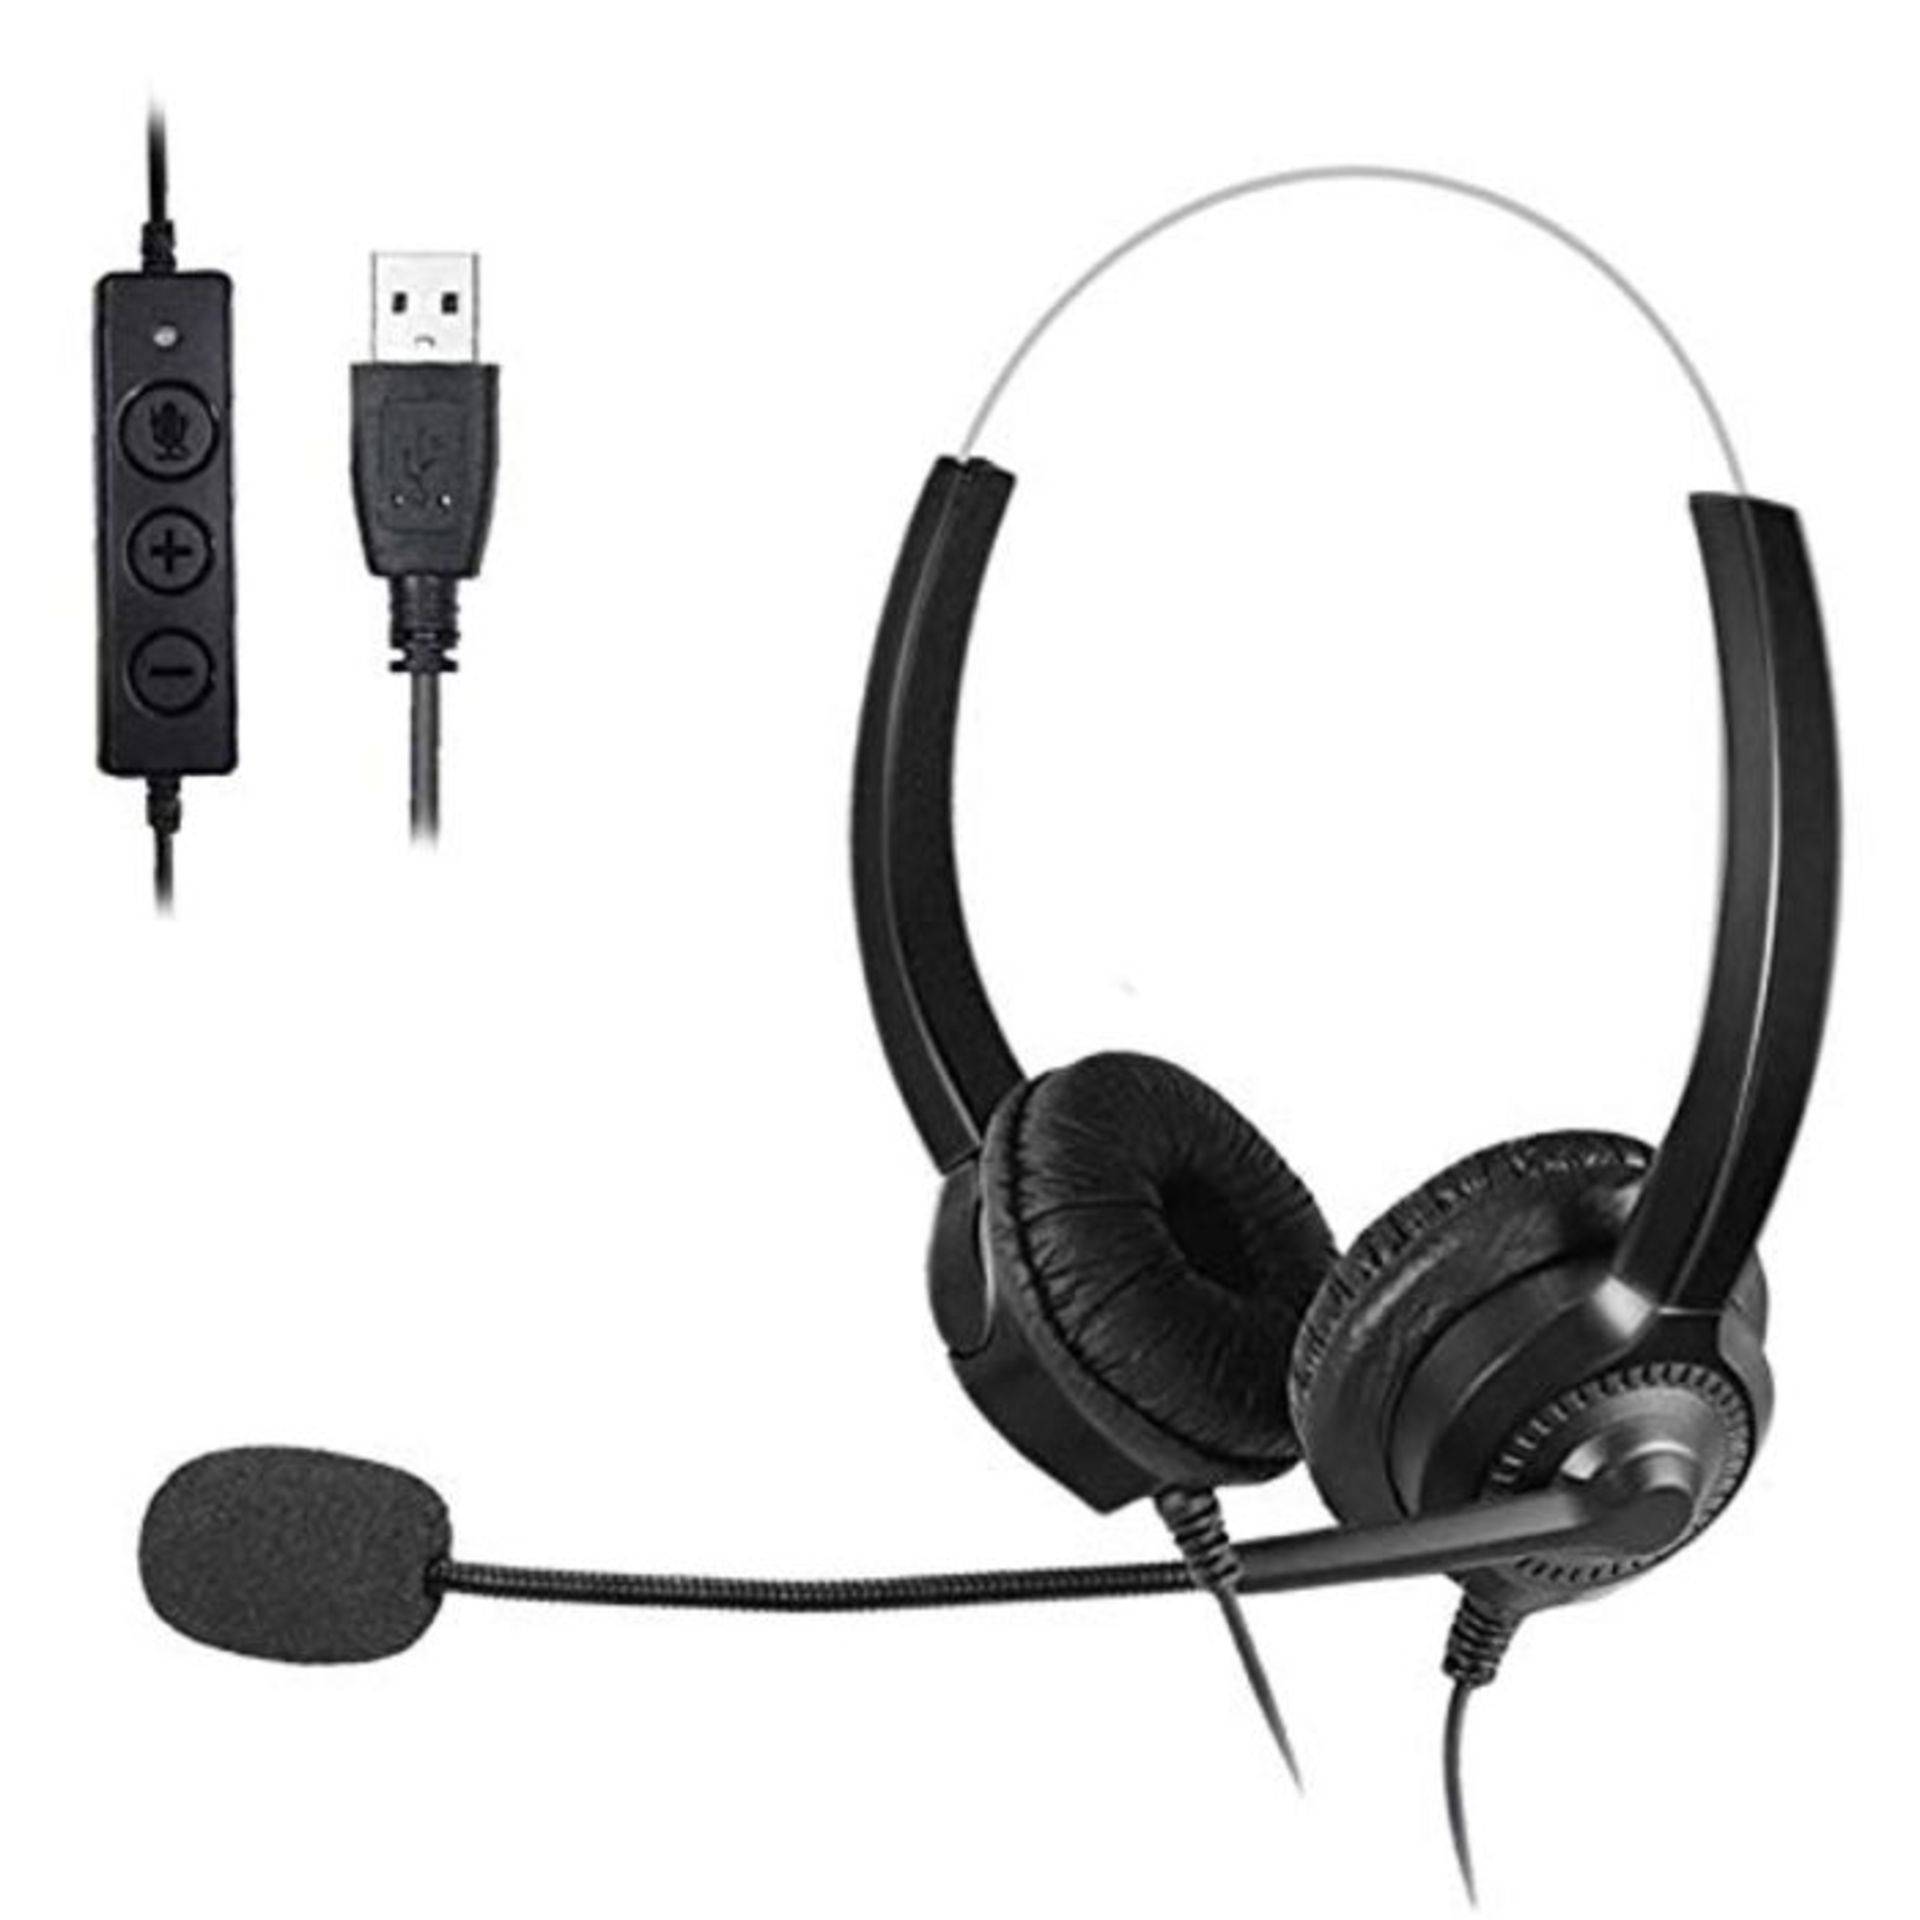 Headset - USB Headsets with Microphone, Noise Cancelling Corded Headphone for PC, Wide